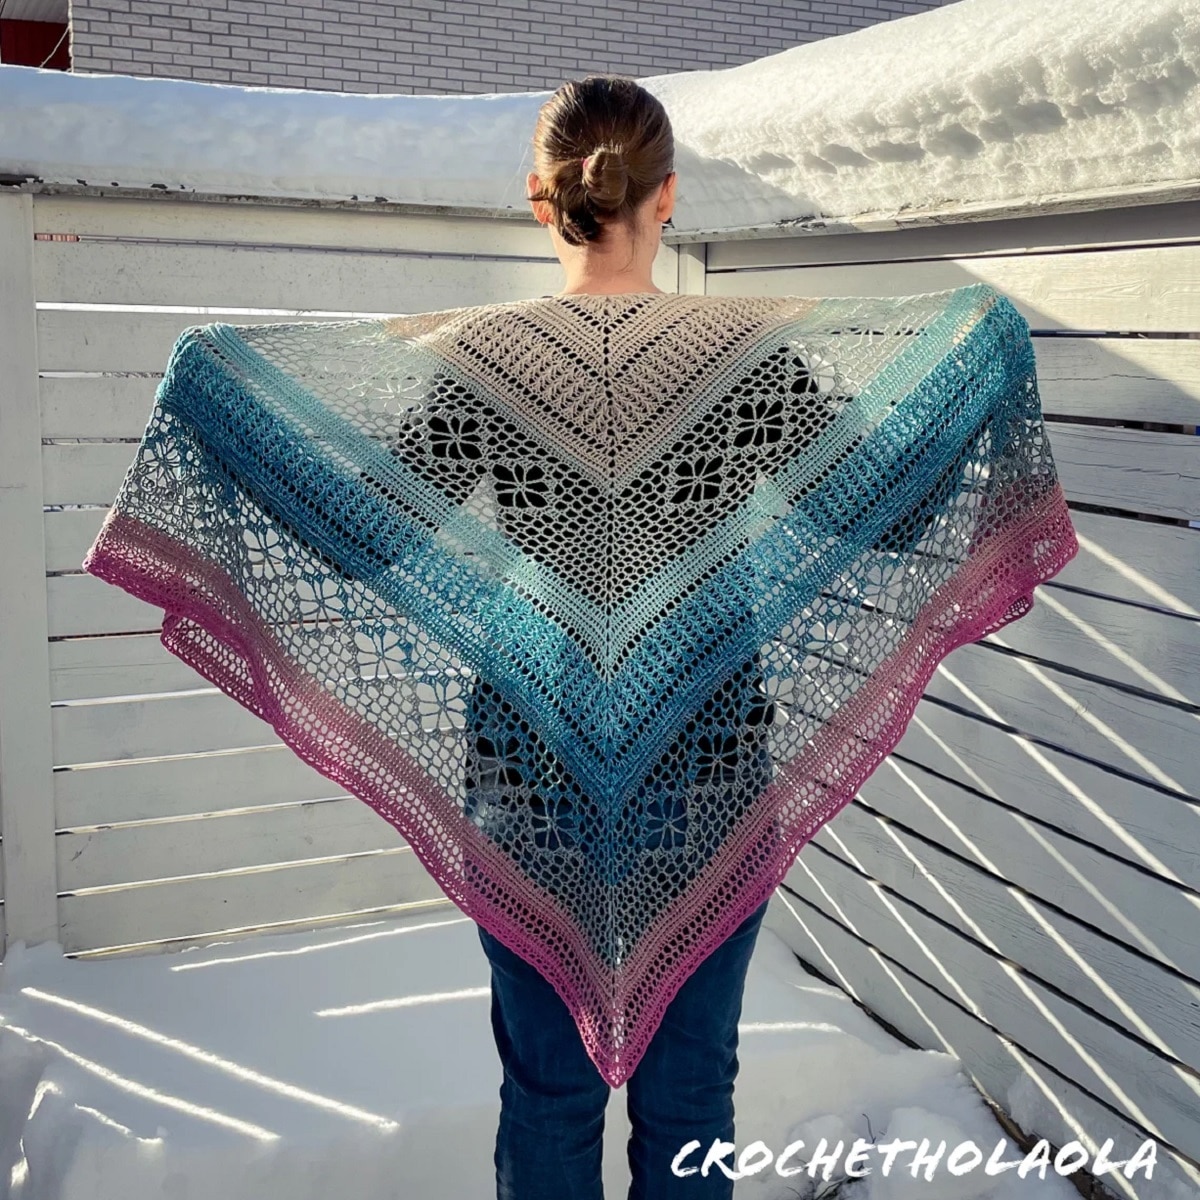 The back of a woman holding a pink, blue, and cream crochet shawl with horizontal straps and diamond shapes in the cream sections.